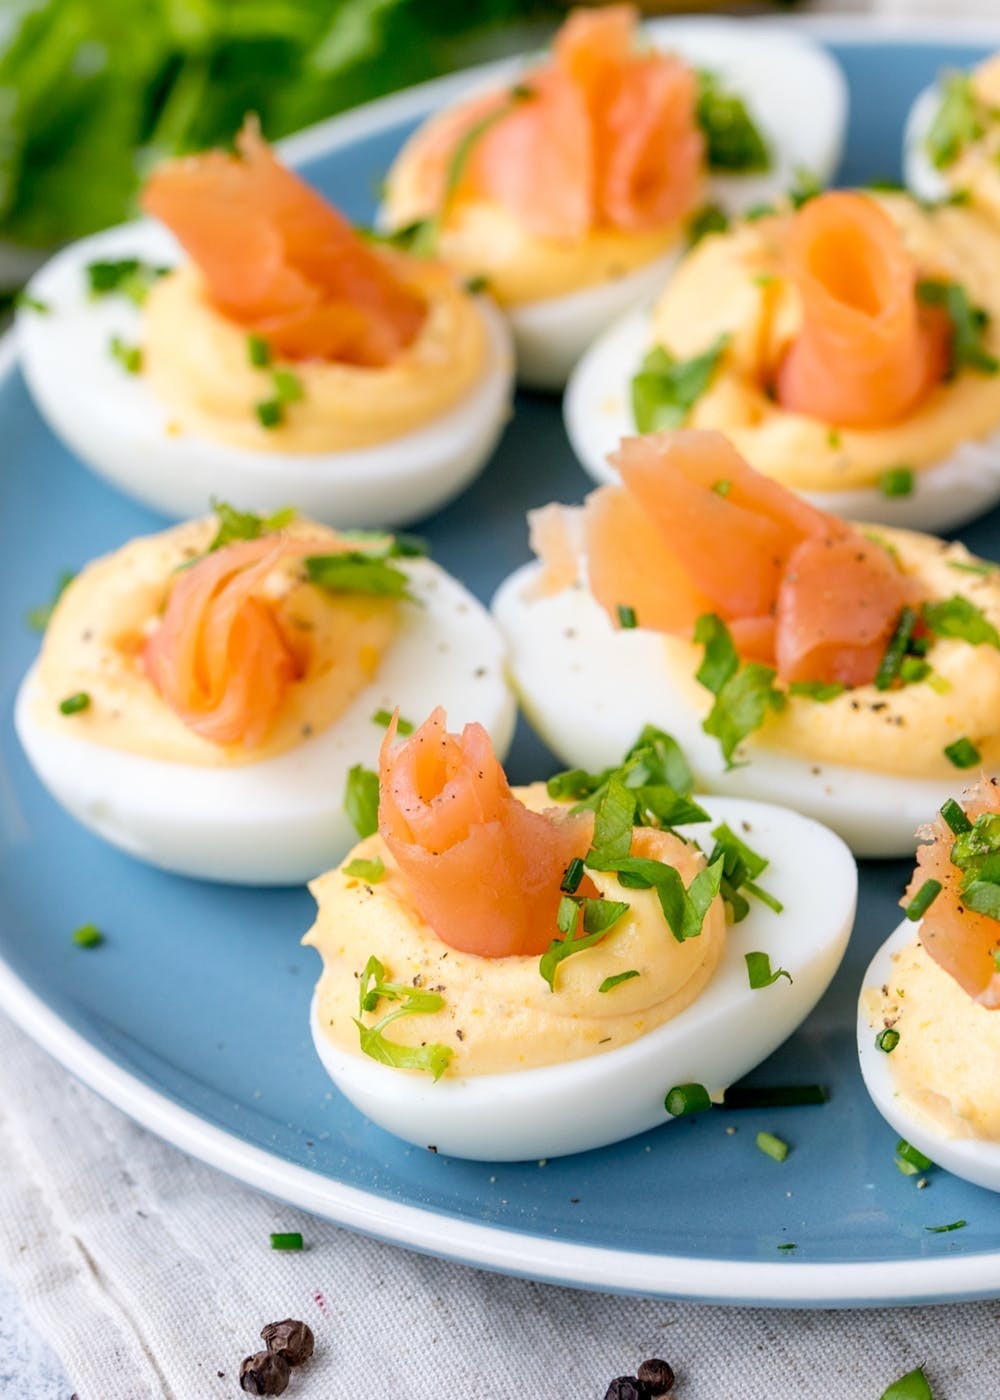 It isn’t Easter without a plate full of deviled eggs. These look fancy AF, but they only take minutes to assemble. Not a fan of smoked salmon? Just sprinkle on some paprika instead. (via Brit + Co.)